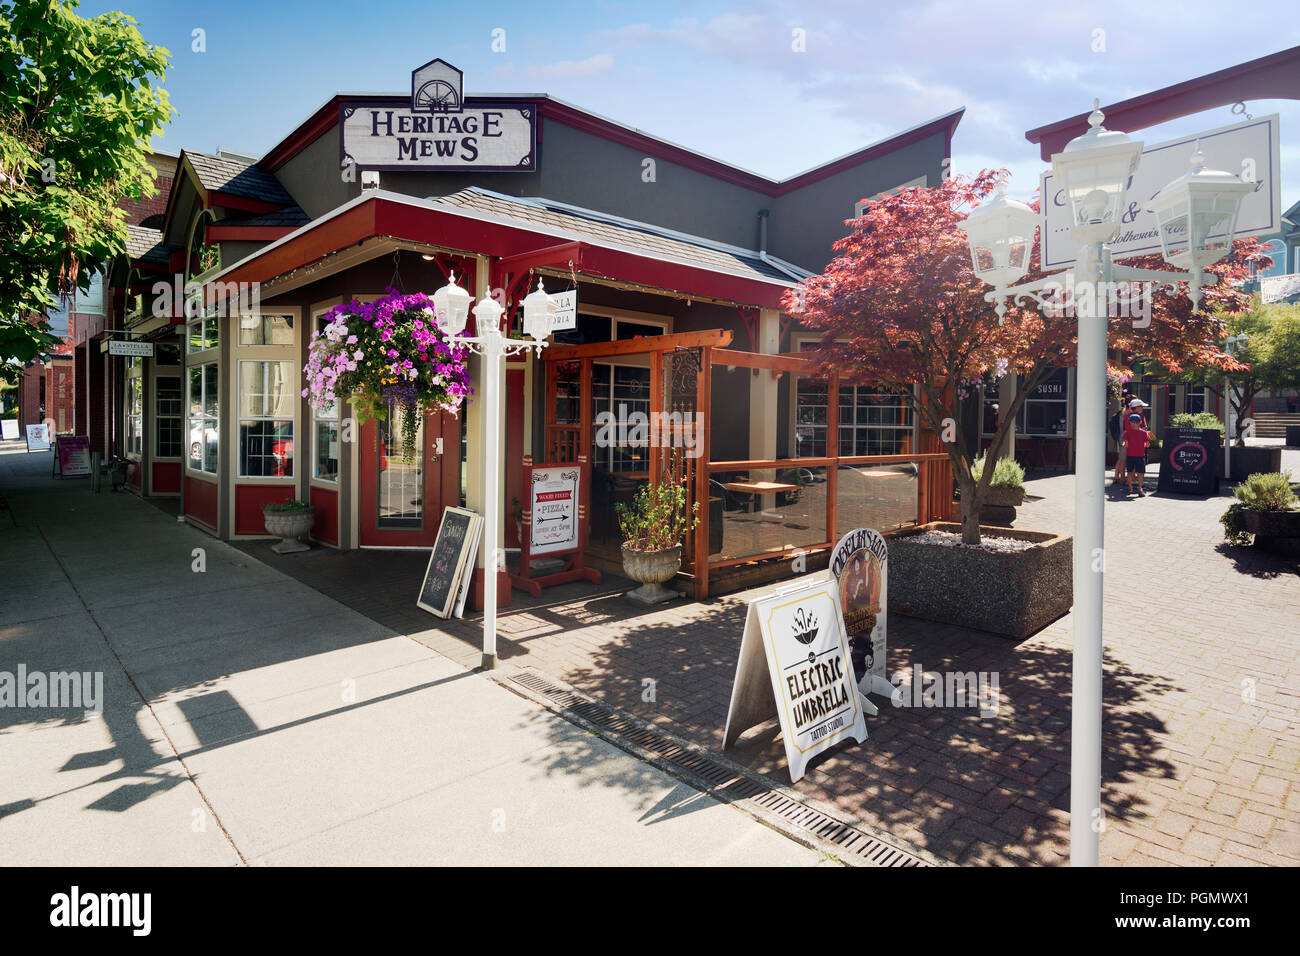 La Stella Trattoria restaurant and other shops at the Heritage Mews, Wesley Street, Old City Quarter of Nanaimo, Vancouver Island, British Columbia, C Stock Photo